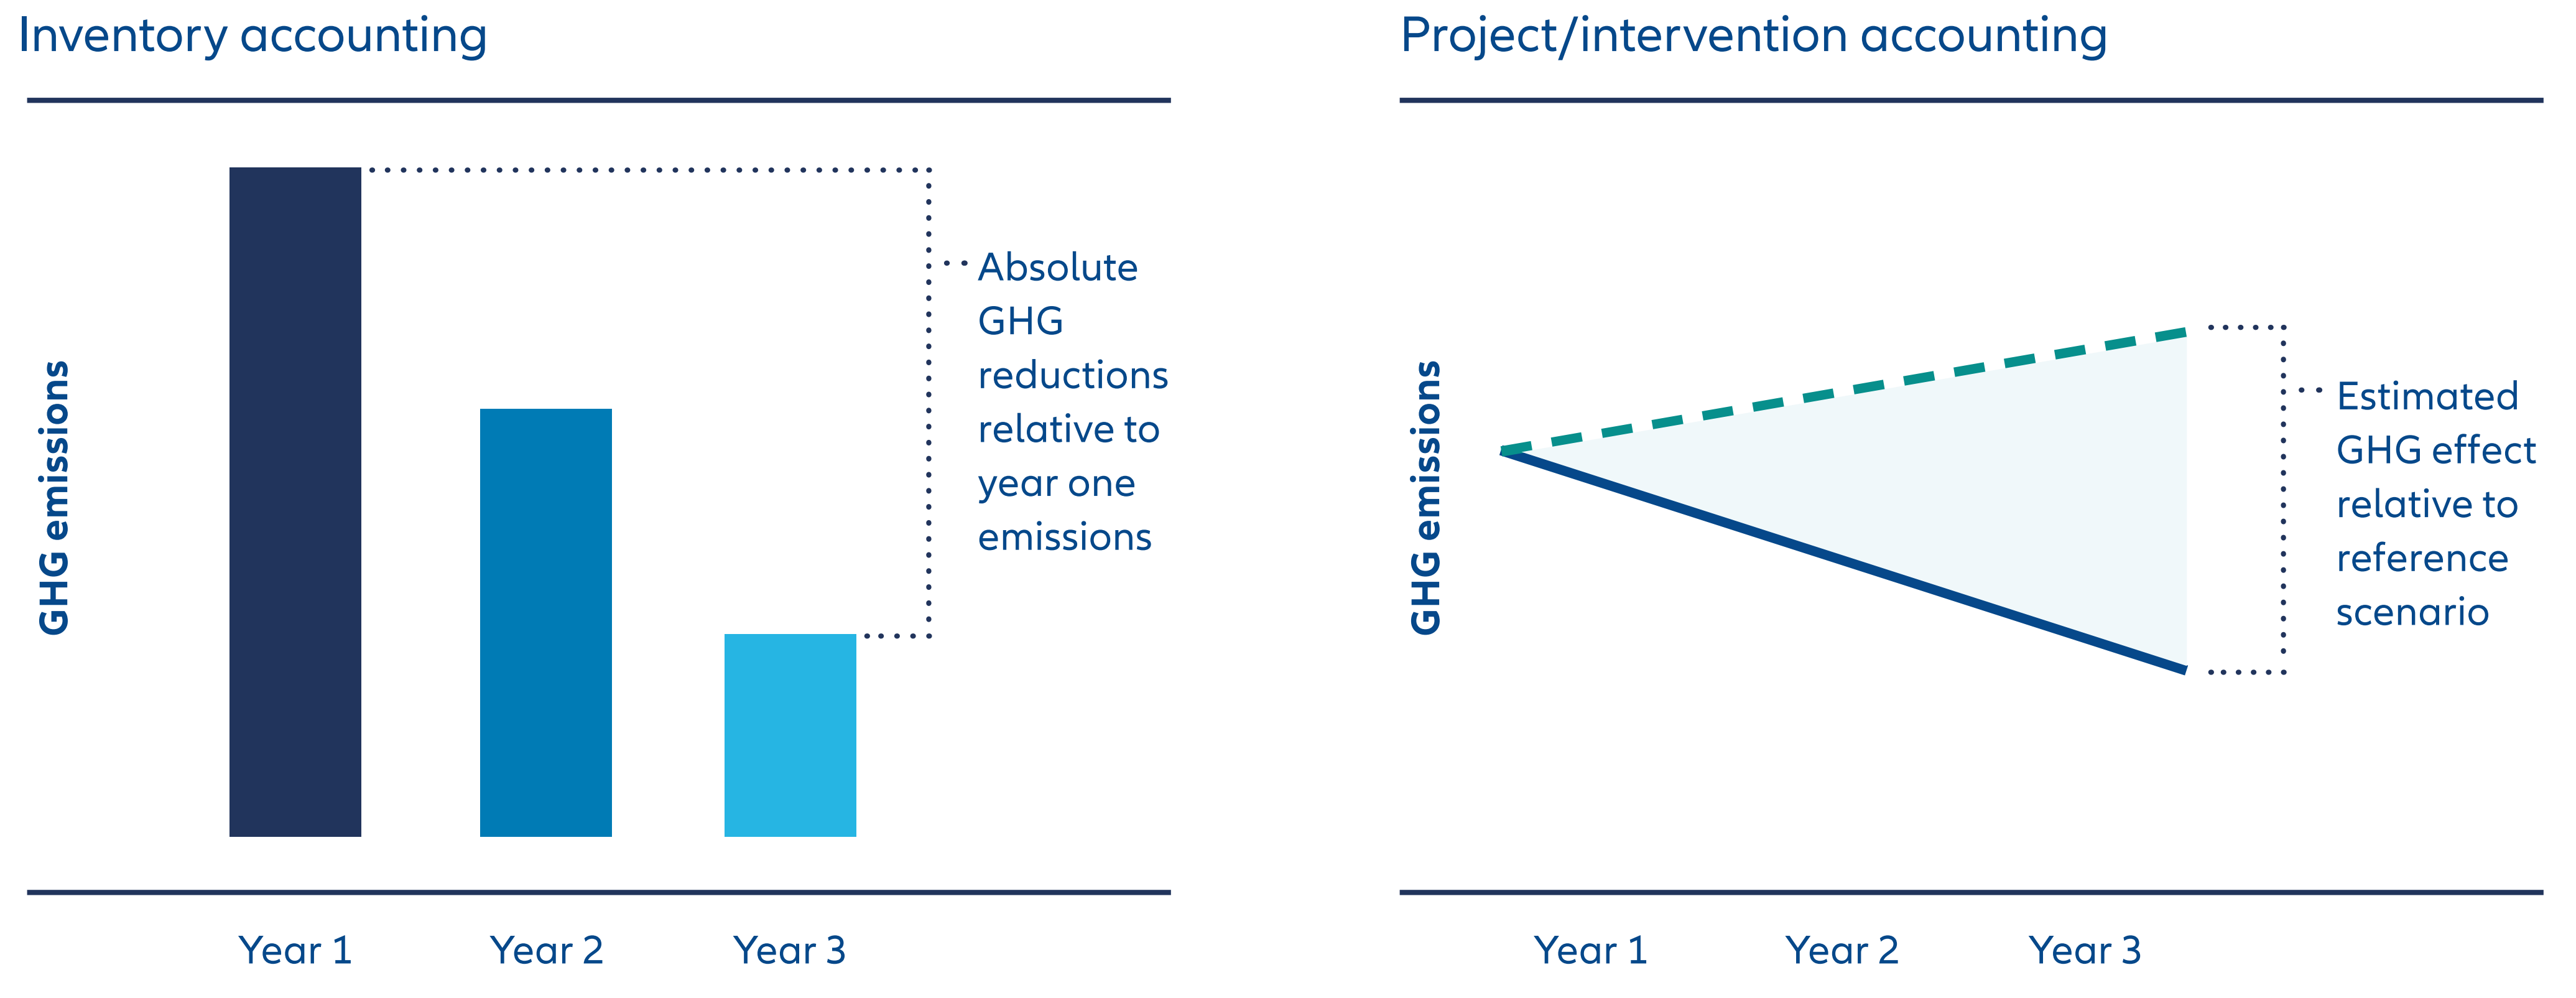 Exhibit 2: Illustrative explanation of inventory GHG accounting at company-level versus avoided emissions as project/intervention accounting at society-level